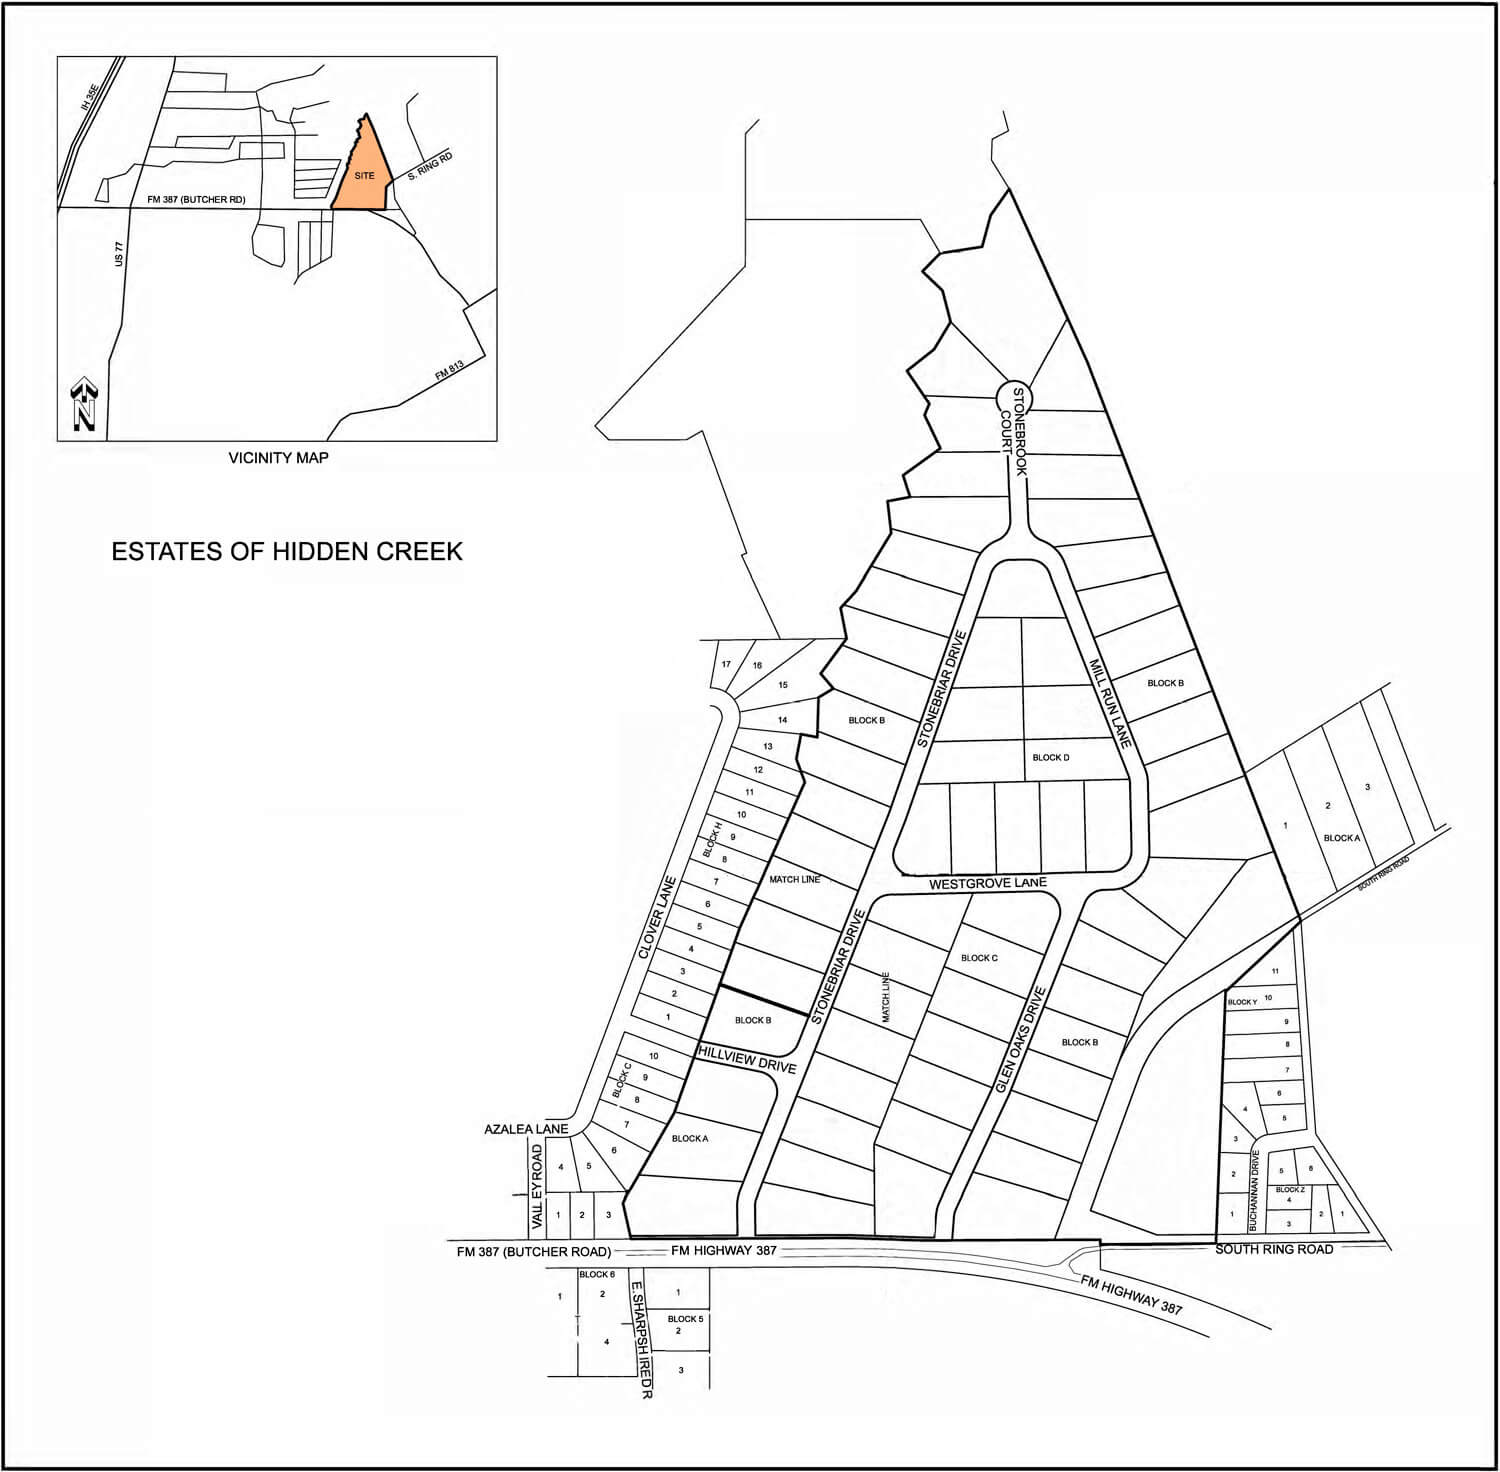 The delopment plan of Estates of Hidden Creek with the location of the 67 plots of land in the 67 acre area